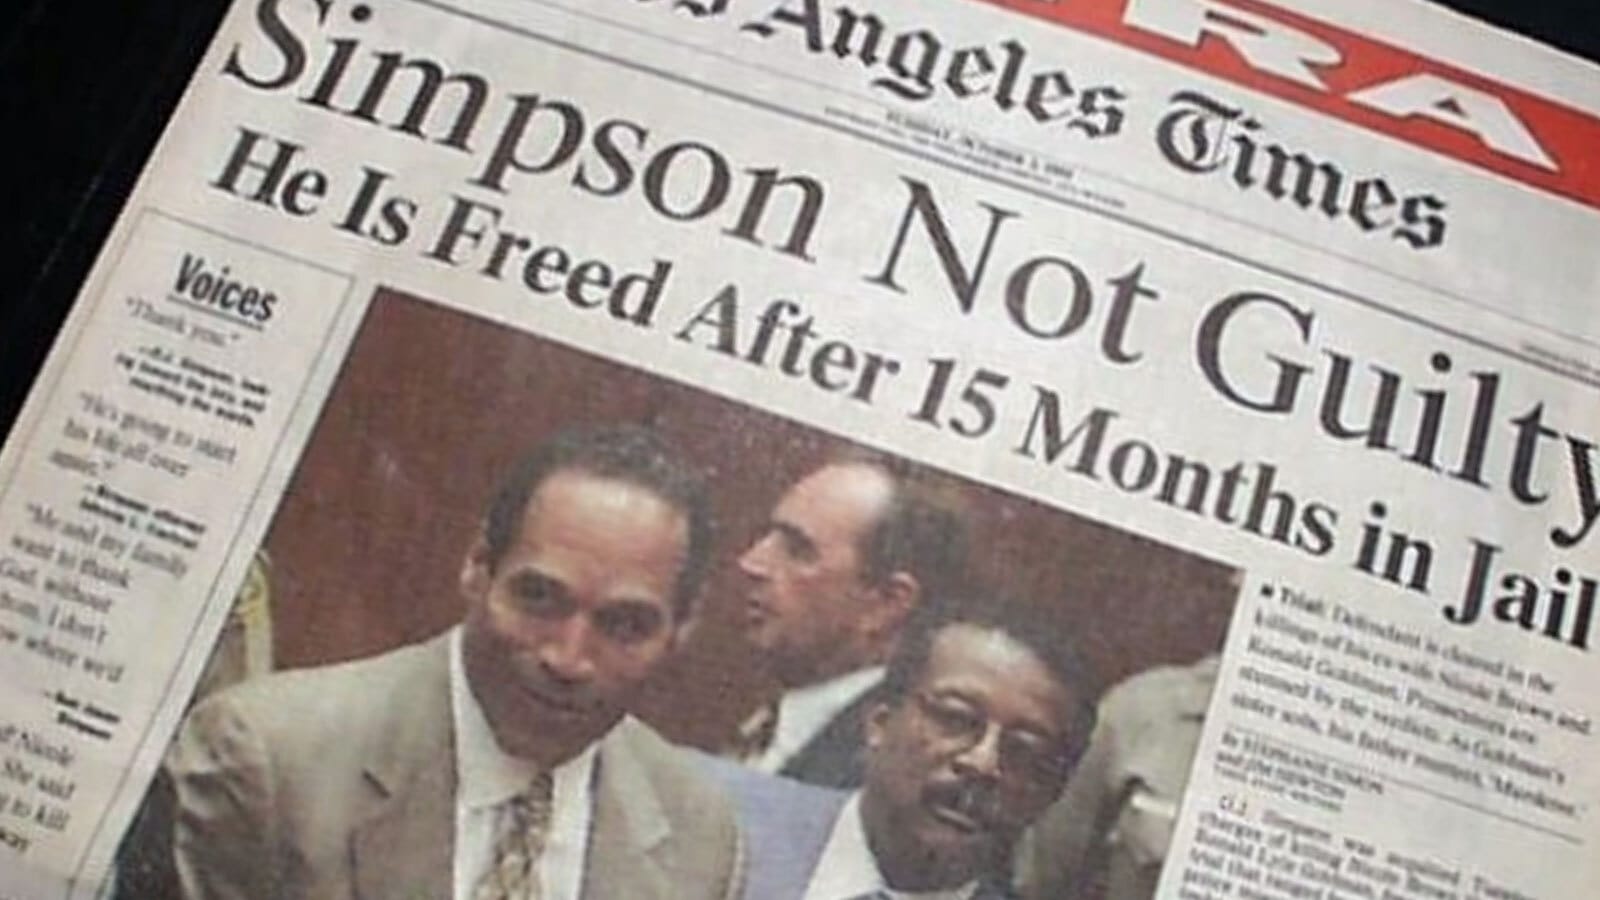 front page of Los Angeles Times Extra, October 3, 1995, headline reads Simpson Not Guilty: He is freed after 15 months in jail. In the photo, he is in a suit in the courtroom, slightly smiling.